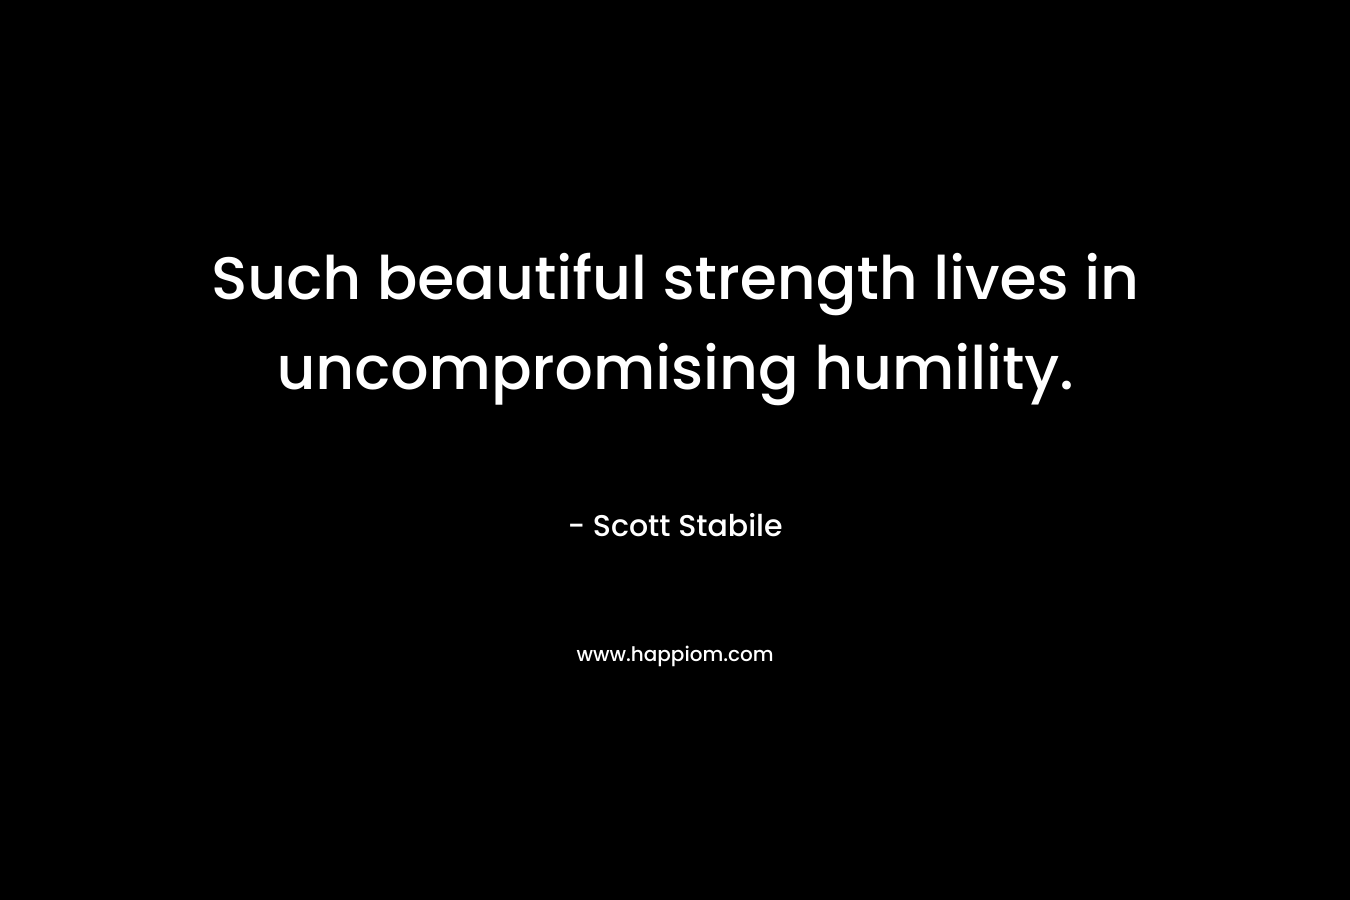 Such beautiful strength lives in uncompromising humility.